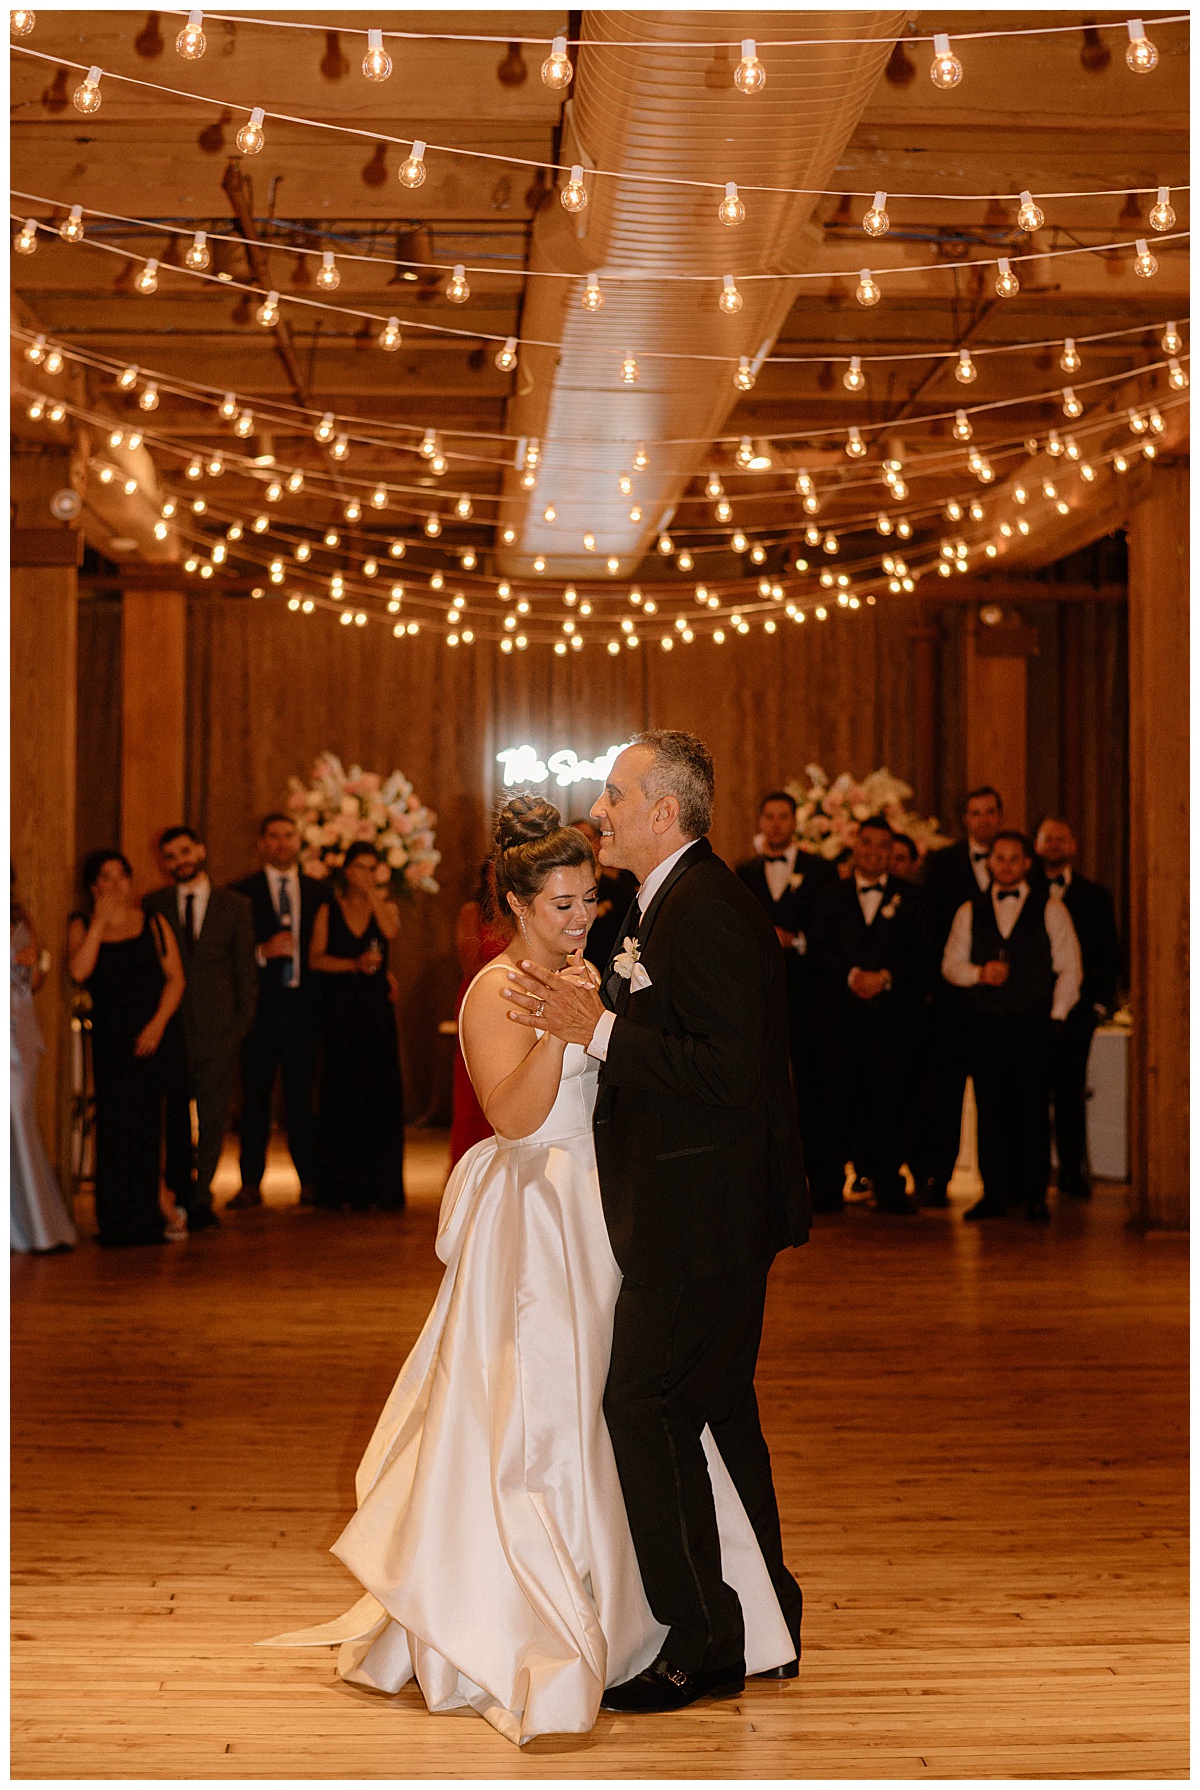 father dances with daughter during reception at Bridgeport Art Center wedding